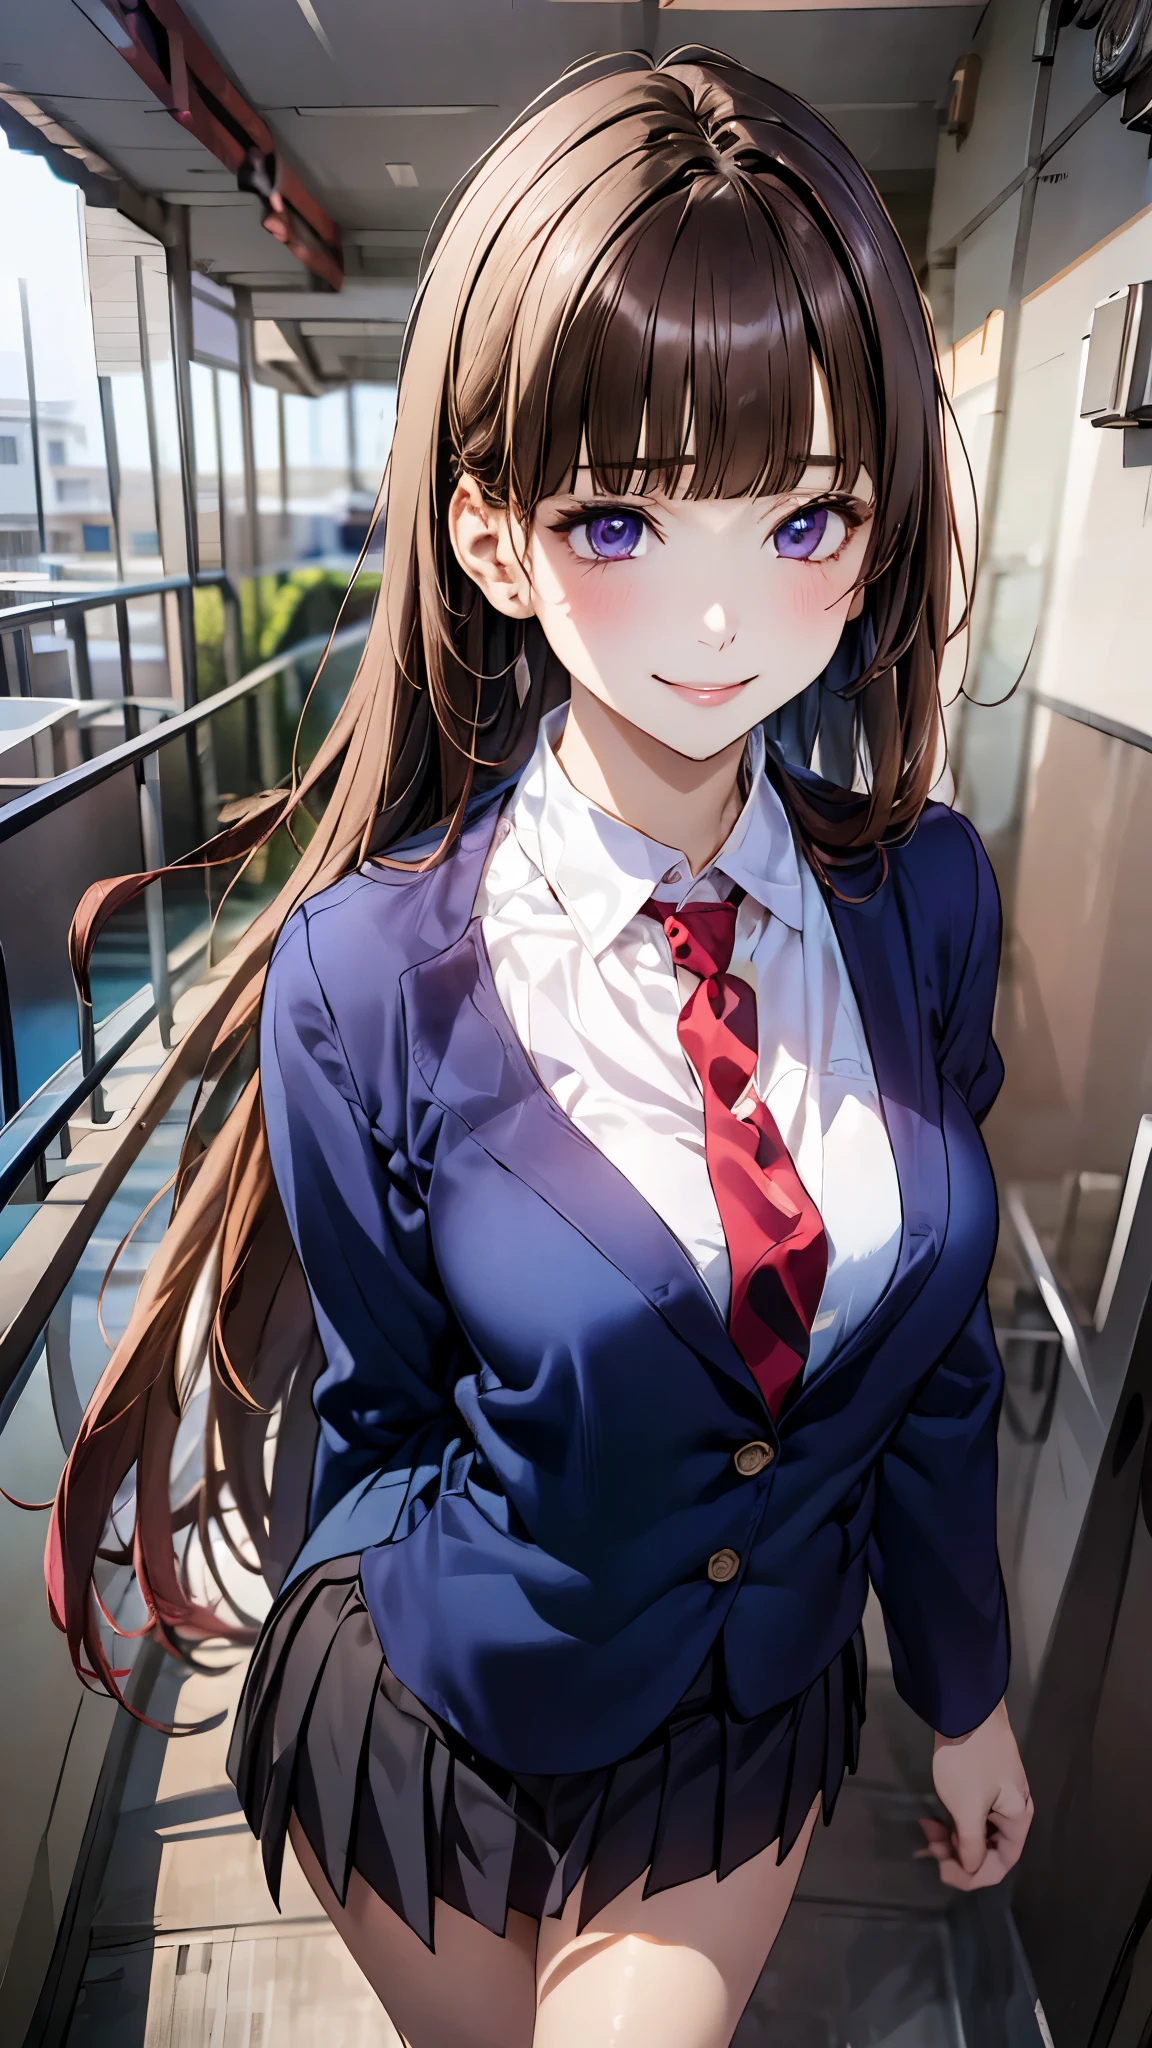 (masterpiece:1.2, top-quality), (realistic, photorealistic:1.4), beautiful illustration, (natural side lighting, movie lighting), nsfw, 
looking at viewer, 1 girl, japanese, high school girl, perfect face, cute and symmetrical face, shiny skin, 
(long hair:1.5, straight hair:1.4, purple brown hair), blunt bangs, purple eyes, long eye lasher, (medium breasts), slender, 
beautiful hair, beautiful face, beautiful detailed eyes, beautiful clavicle, beautiful body, beautiful chest, beautiful thigh, beautiful legs, beautiful fingers, 
((private high , school navy blazer, close blazer, white collared shirts, navy pleated mini skirt), navy tie), 
(beautiful scenery), evening, (school hallway),, standing, (lovely smile, upper eyes), 